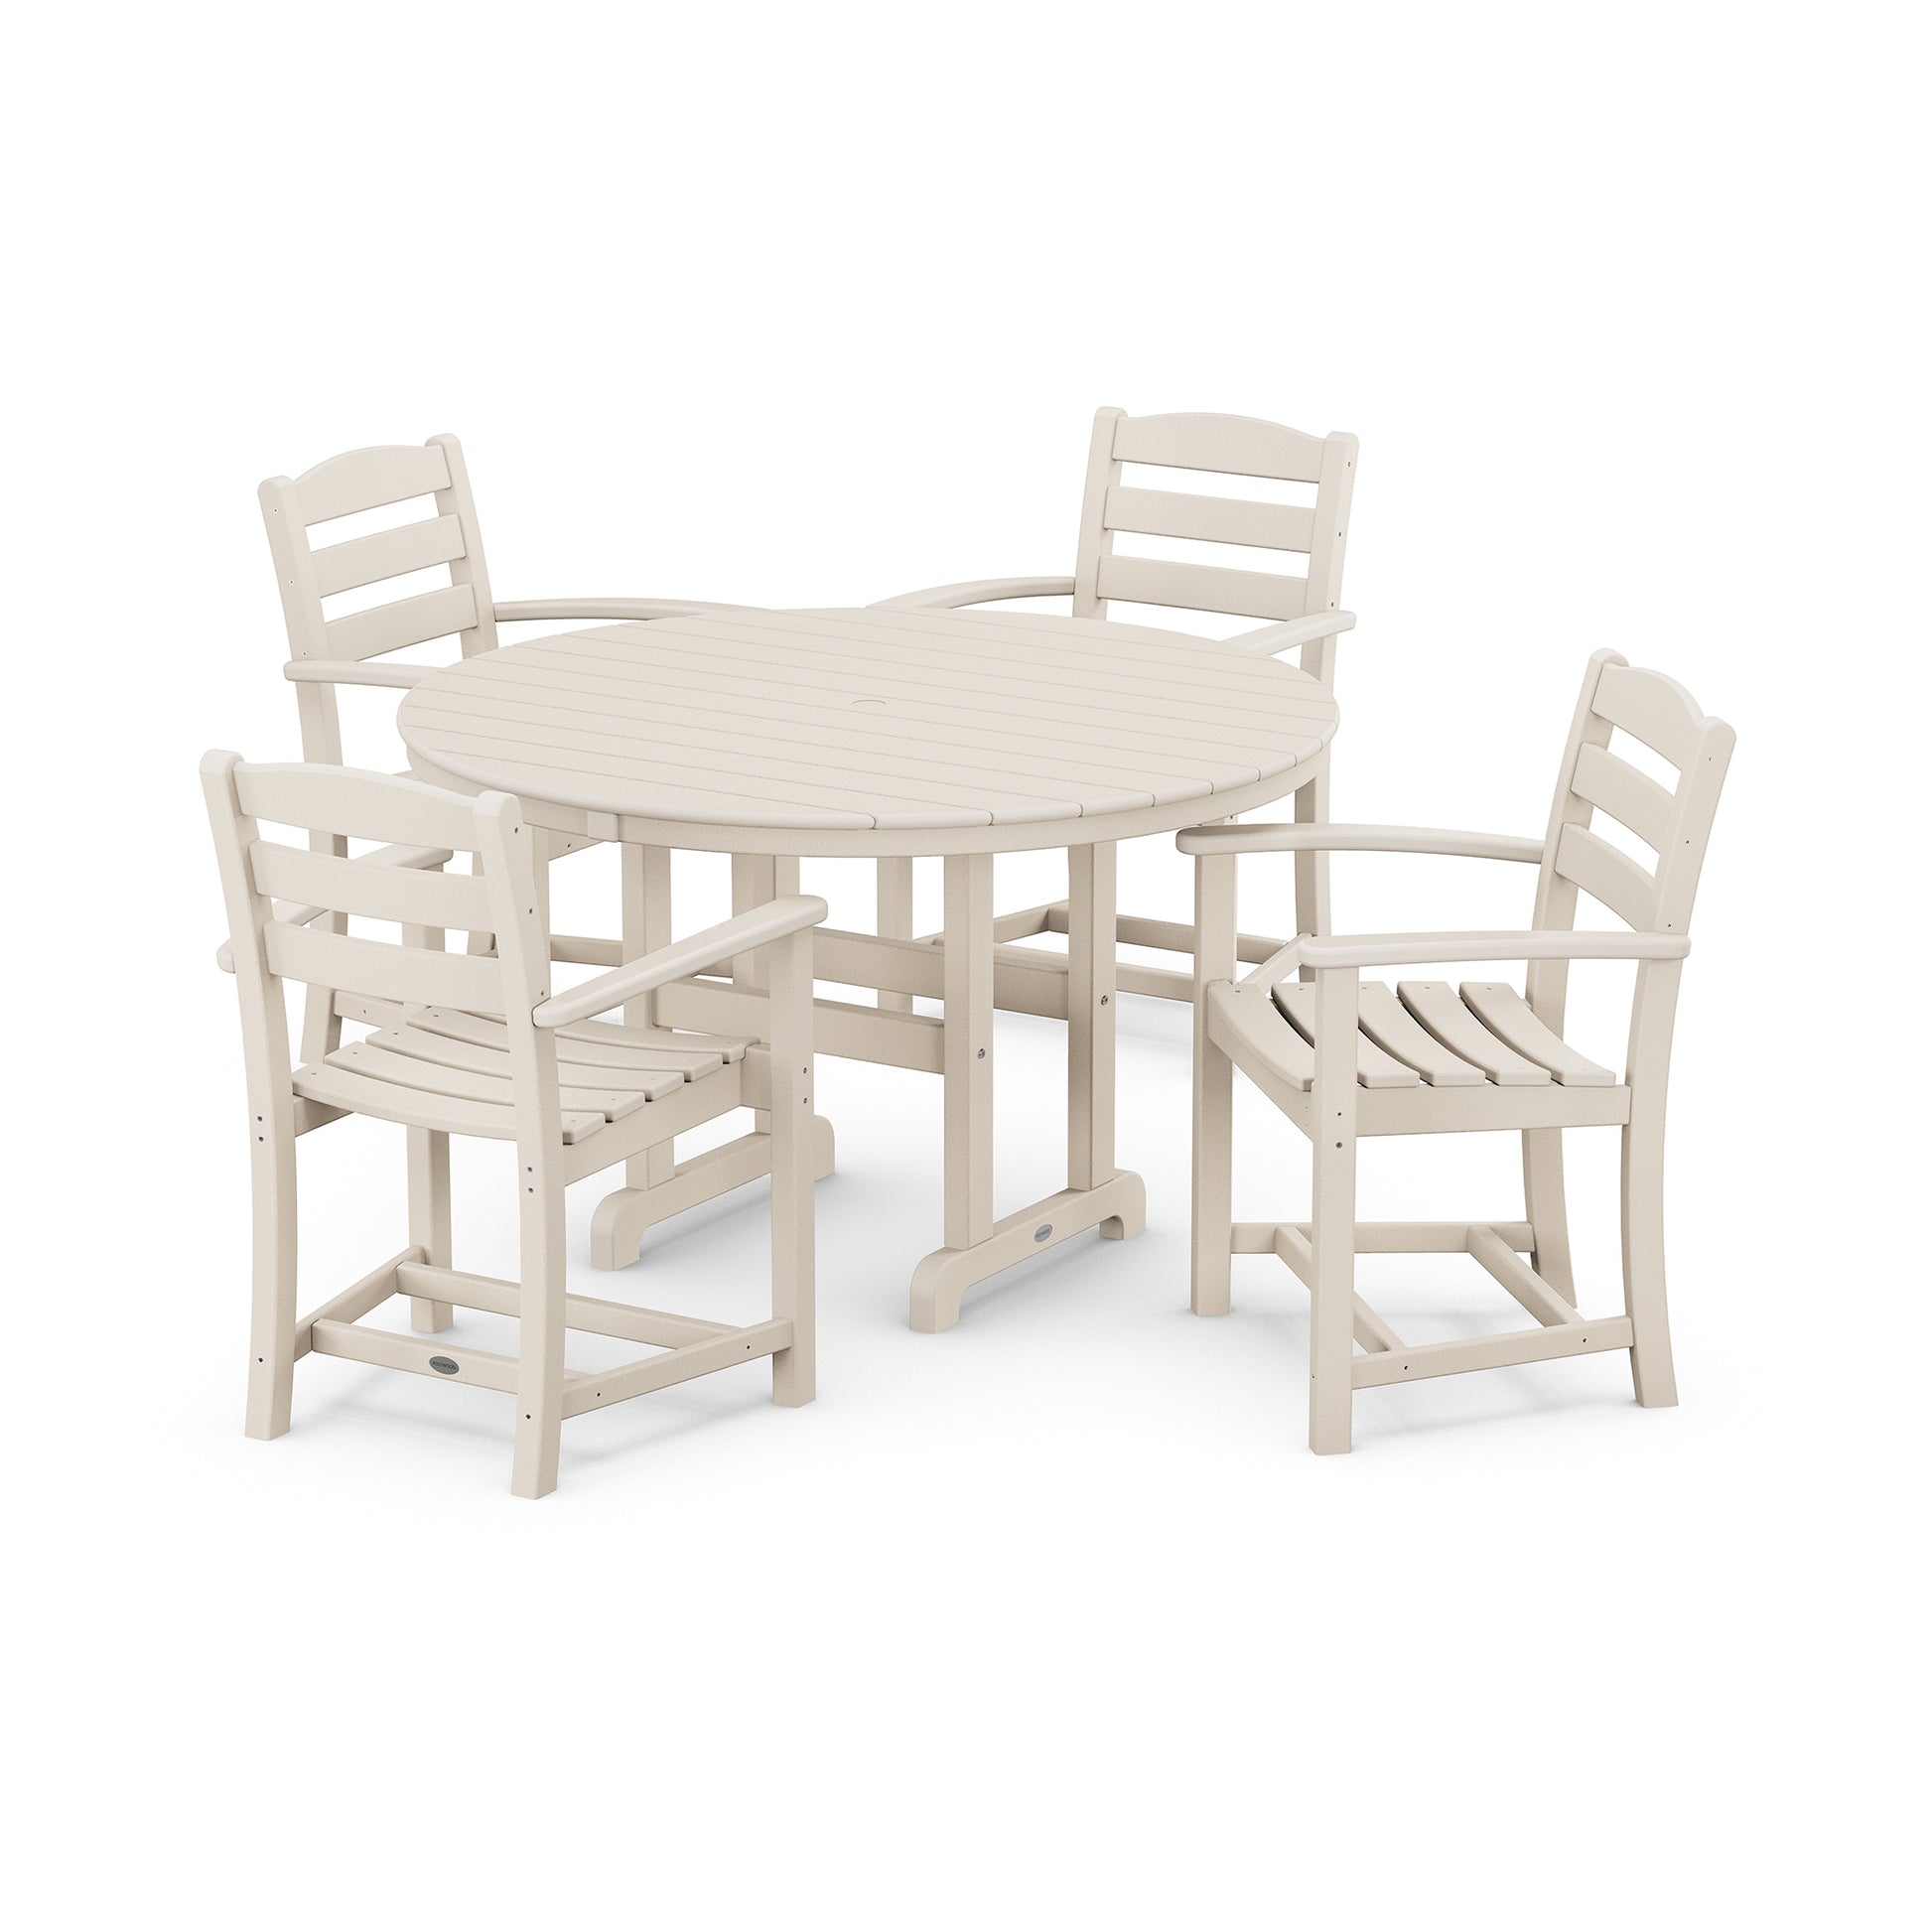 A round, light beige POLYWOOD La Casa Café 5-Piece Dining Set featuring four chairs with slatted backs, positioned on a white background. The table and chairs are constructed from POLYWOOD.